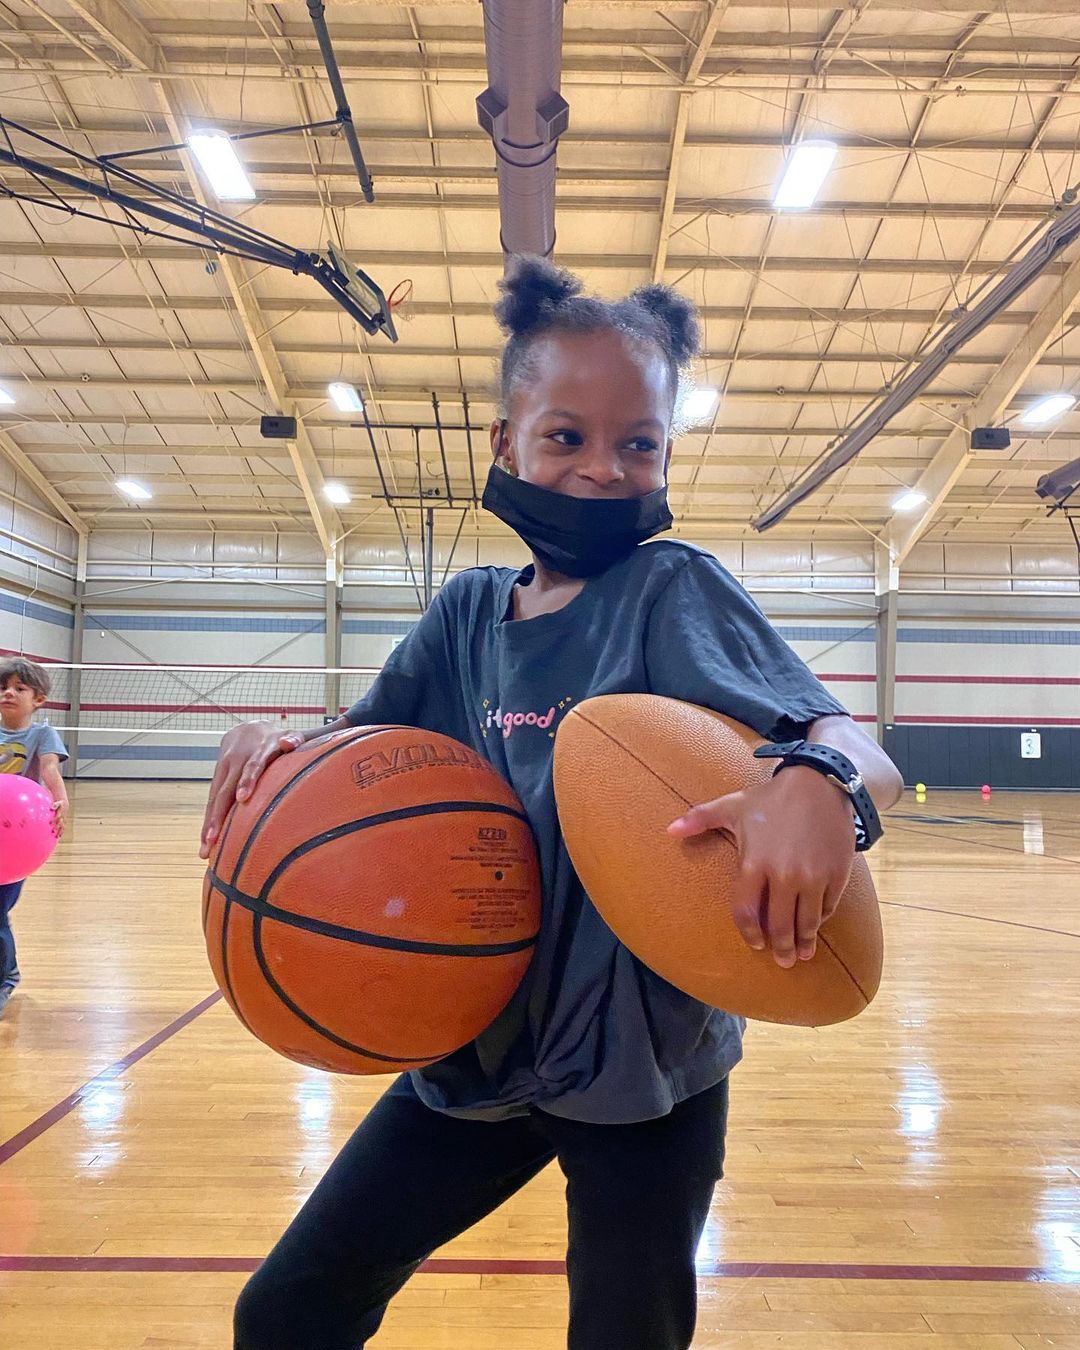 A young girl wearing a mask holding basketballs in a gym that supports Memphis nonprofits.